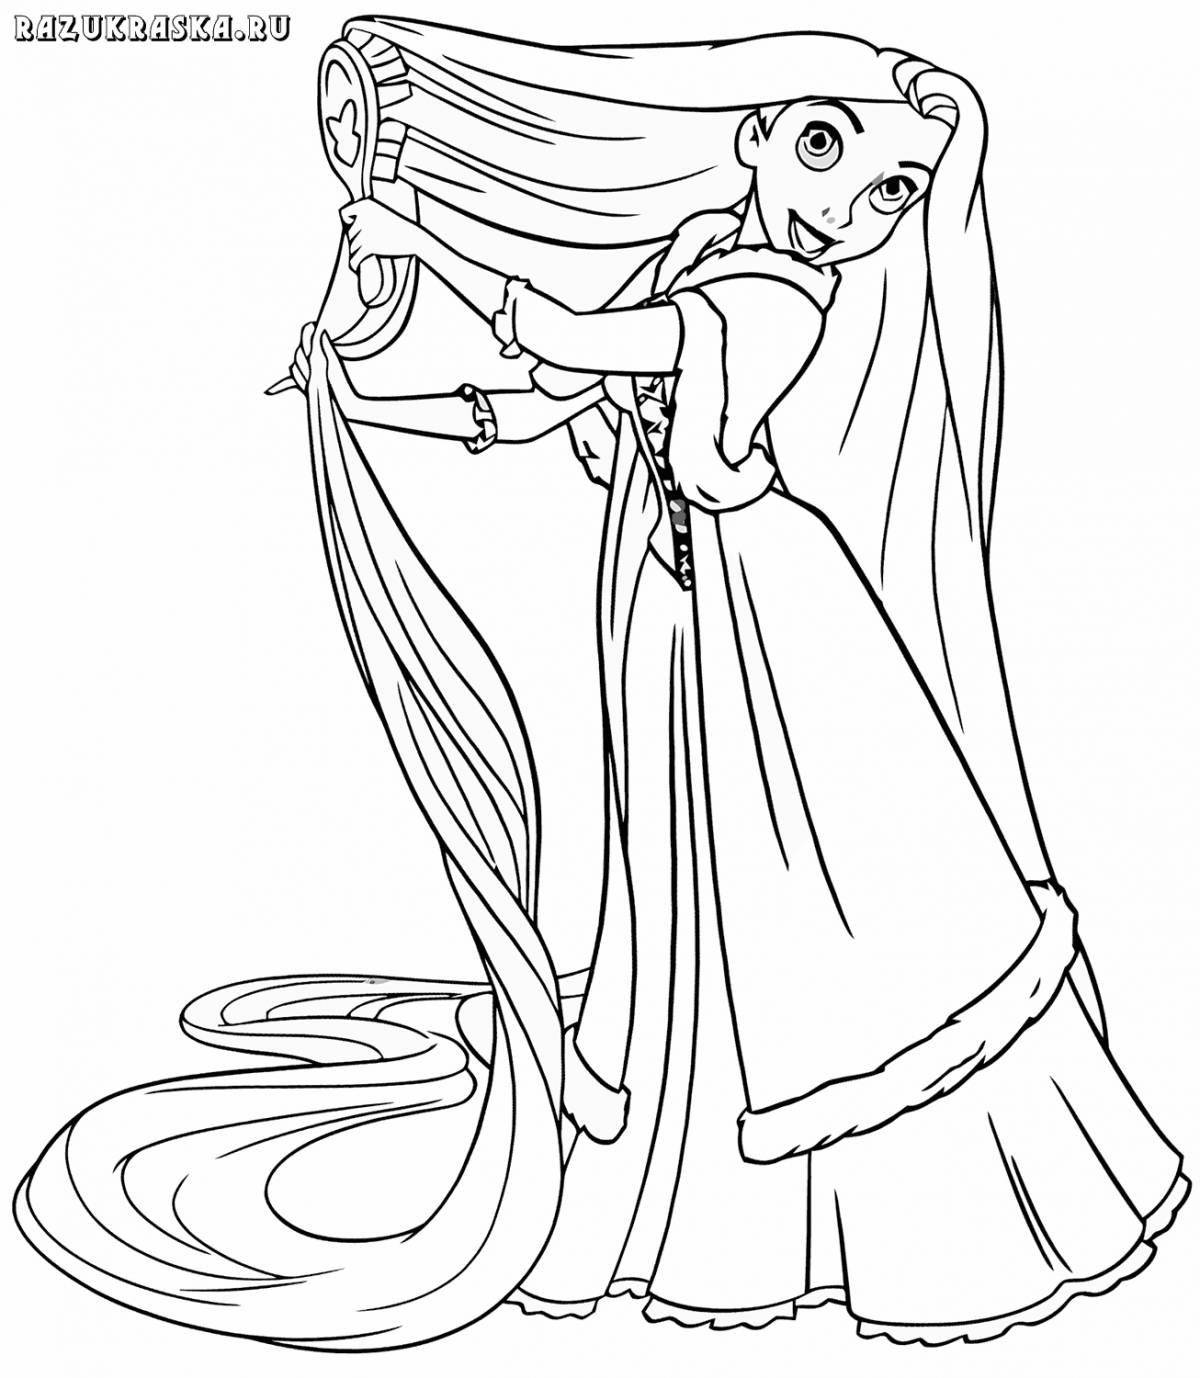 Unusual coloring of rapunzel with clothes